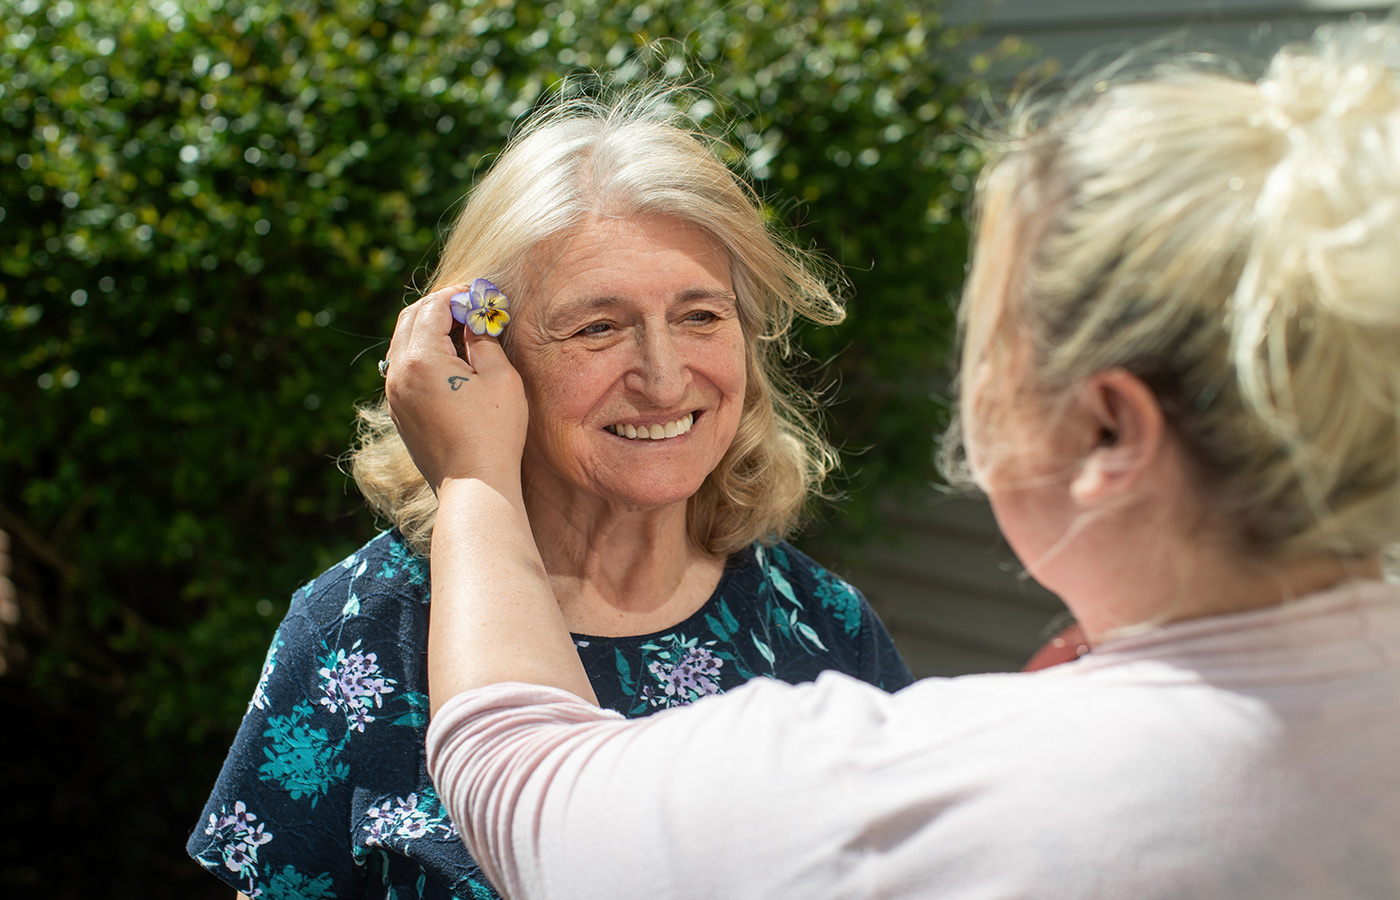 A naya caregiver putting a flower in a resident's hair.